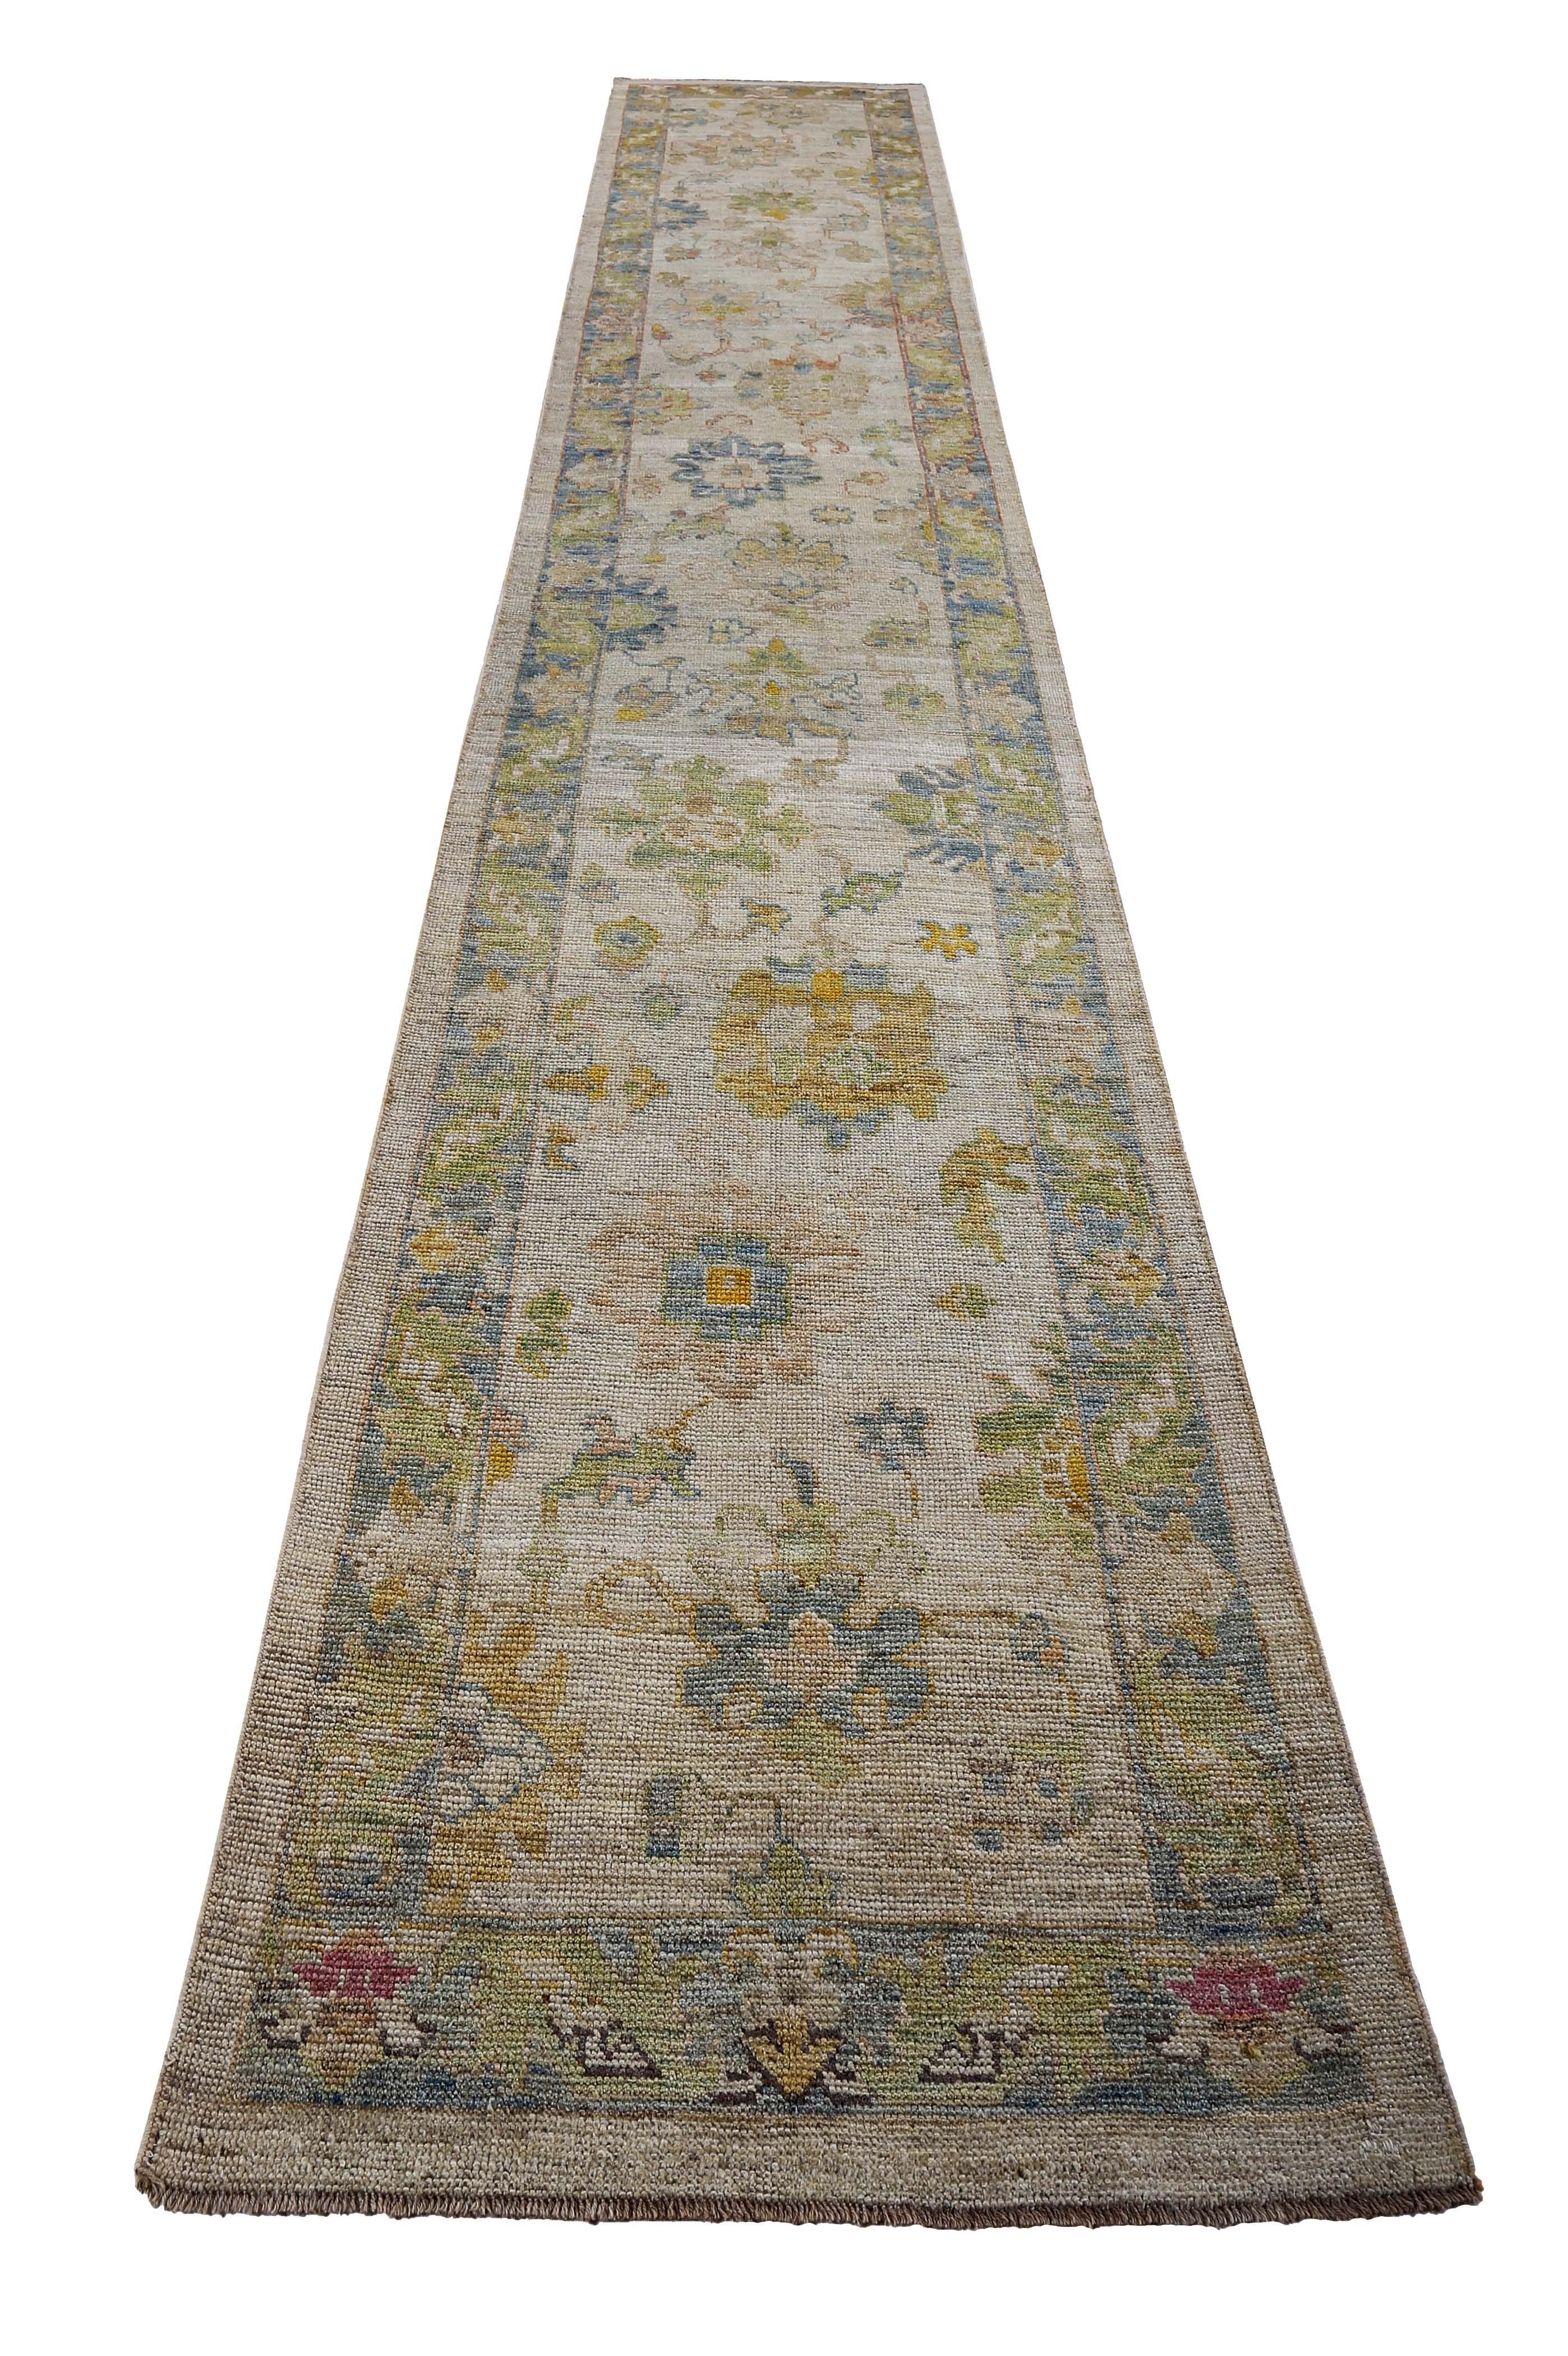 Turkish runner rug made of handwoven sheep’s wool of the finest quality. It’s colored with organic vegetable dyes that are certified safe for humans and pets alike. It features blue and green floral patterns on a beautiful ivory field. Flower